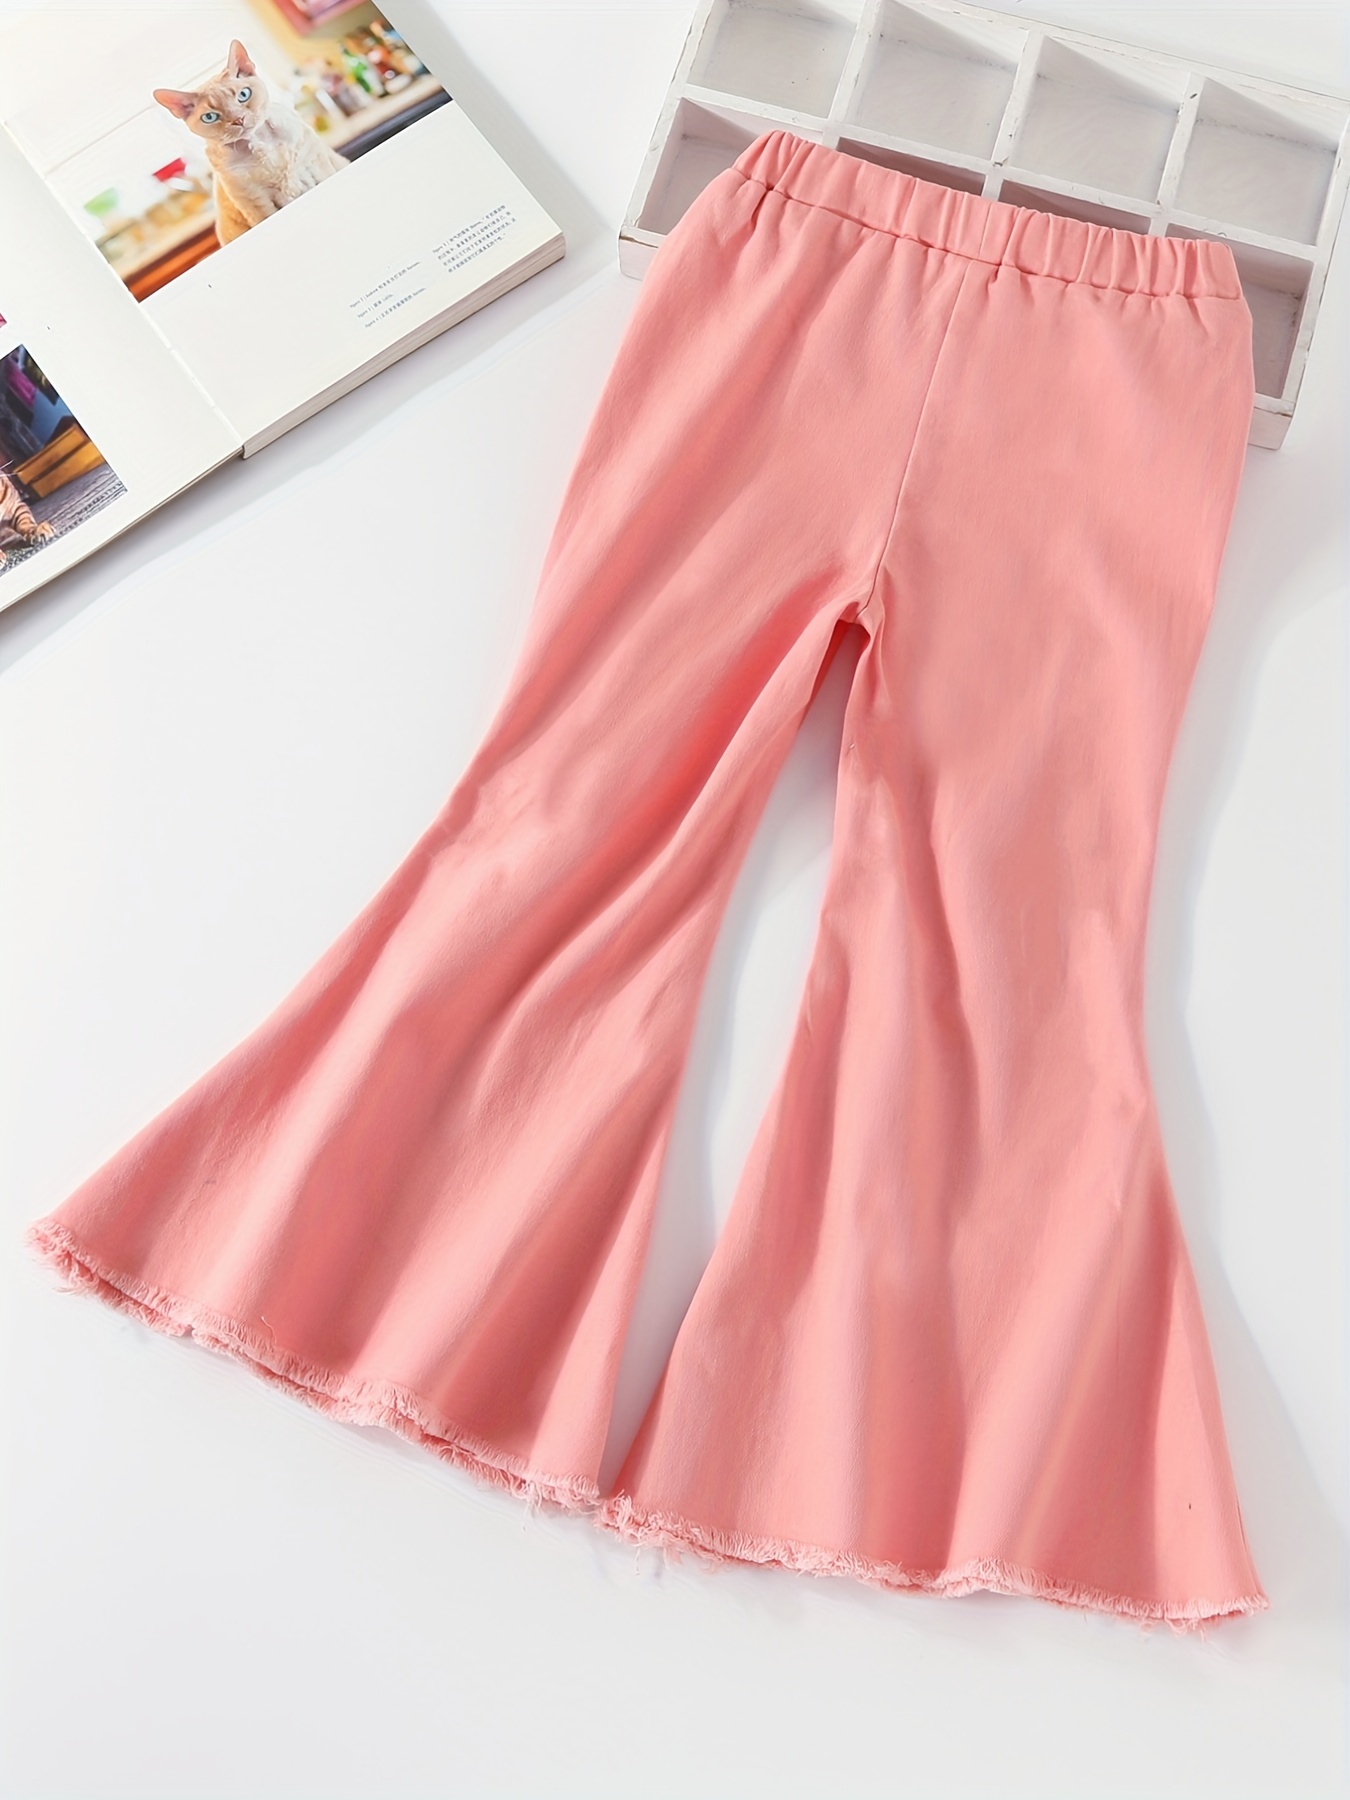 Baby Girls Denim Jeans Stretch Kids Wide Leg Pants Children Outwear Trousers  for Teenager Girl Spring Autumn